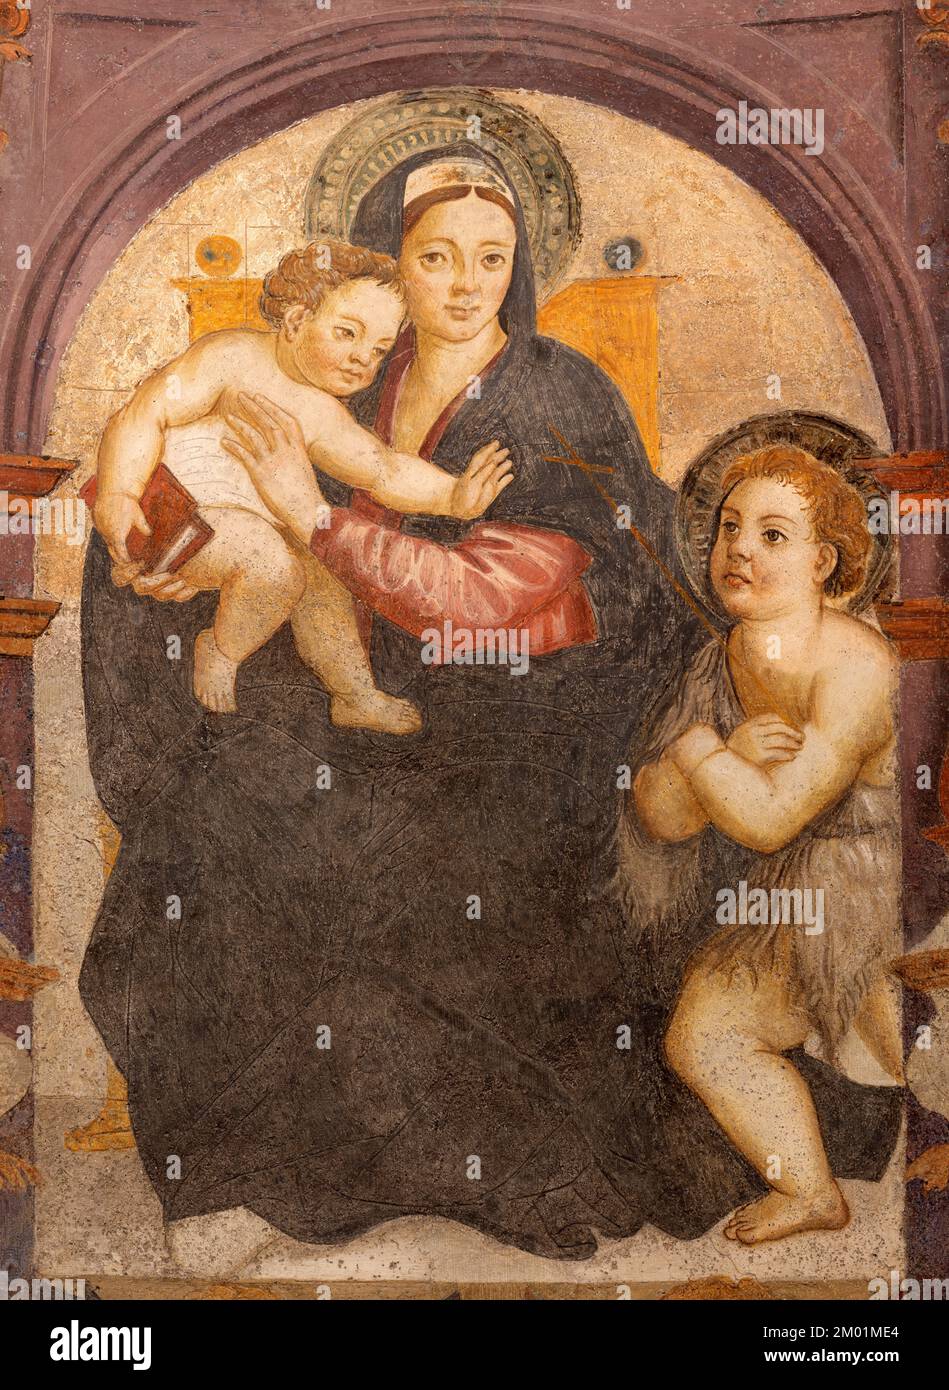 AOSTA, ITALY - JULY 14, 2018: The fresco of Madonna with the saint St. John the Baptist in the Cathedral by unknown artist (1526 - 1530). Stock Photo